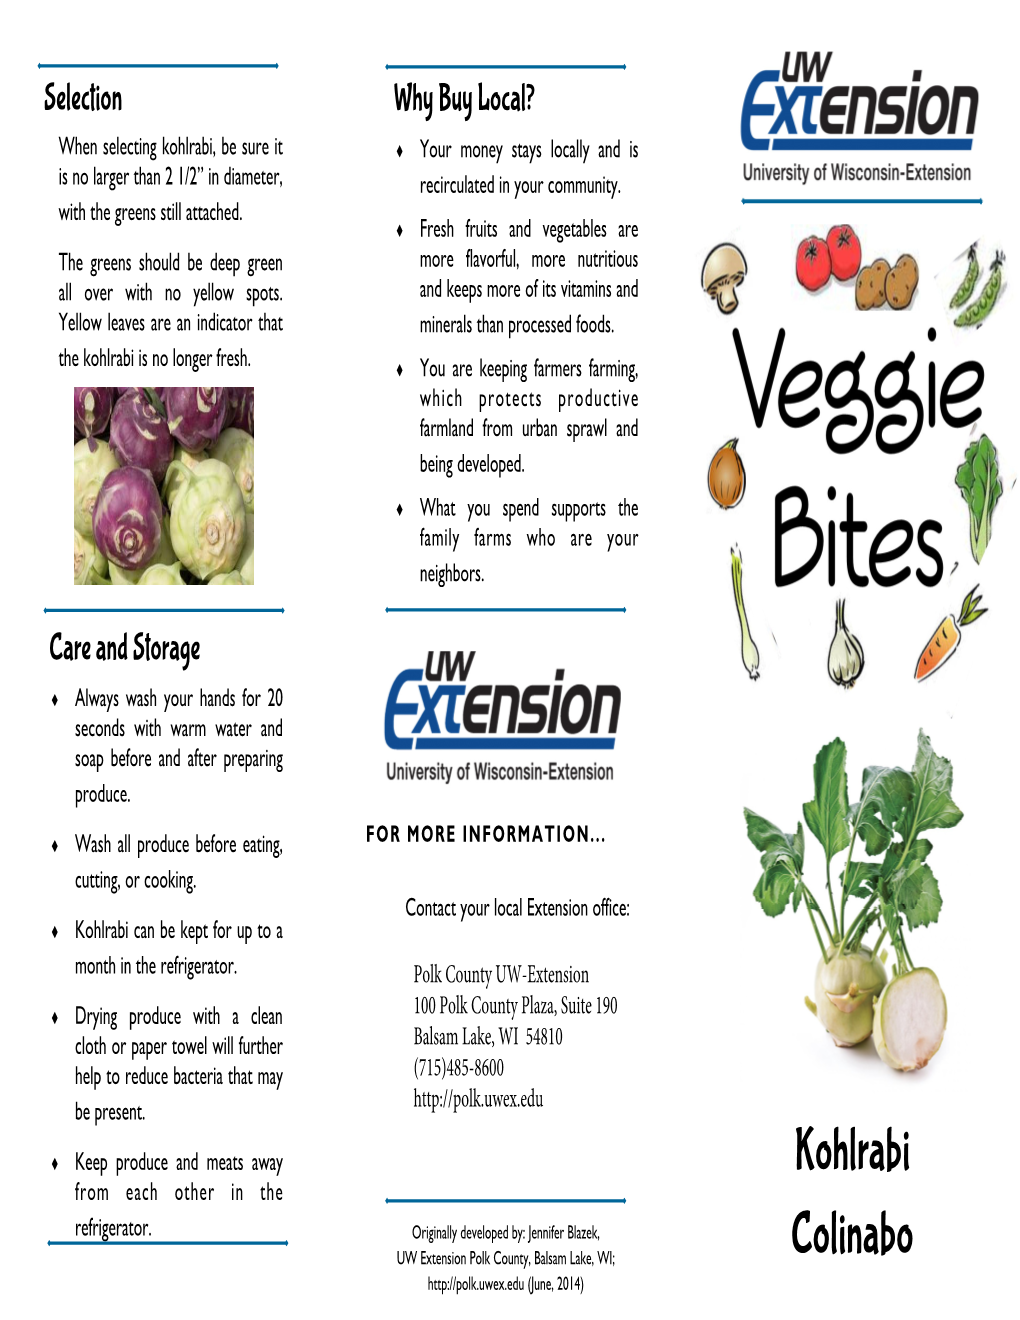 Kohlrabi, Be Sure It  Your Money Stays Locally and Is Is No Larger Than 2 1/2” in Diameter, Recirculated in Your Community